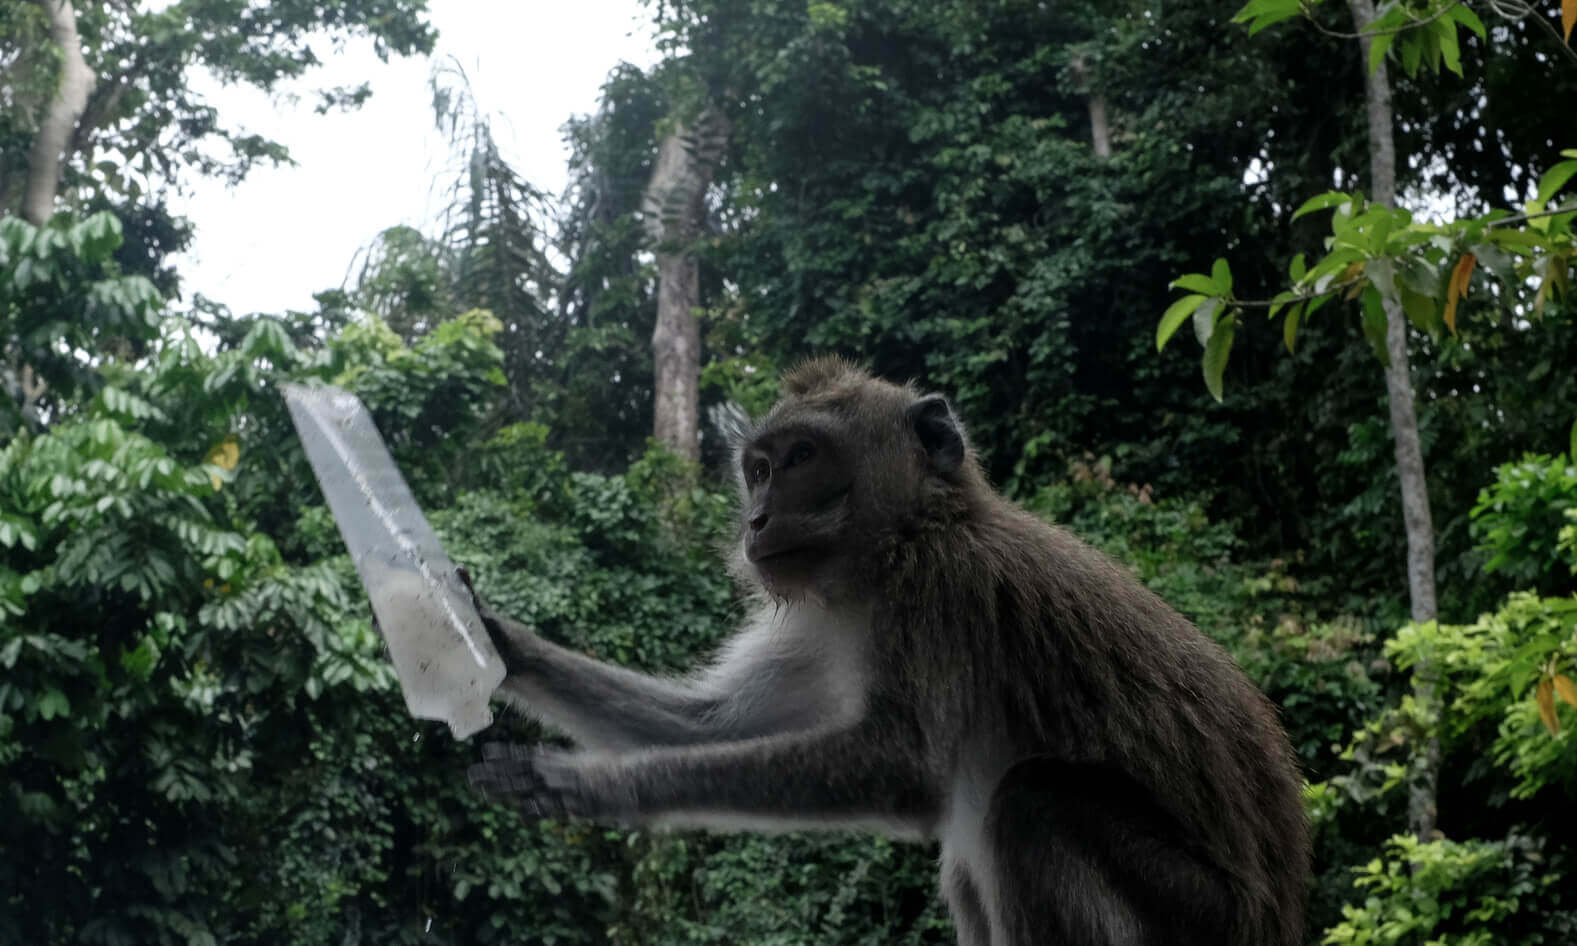 A curious monkey examining a clear plastic bottle in a lush forest setting, surrounded by coconut trees.